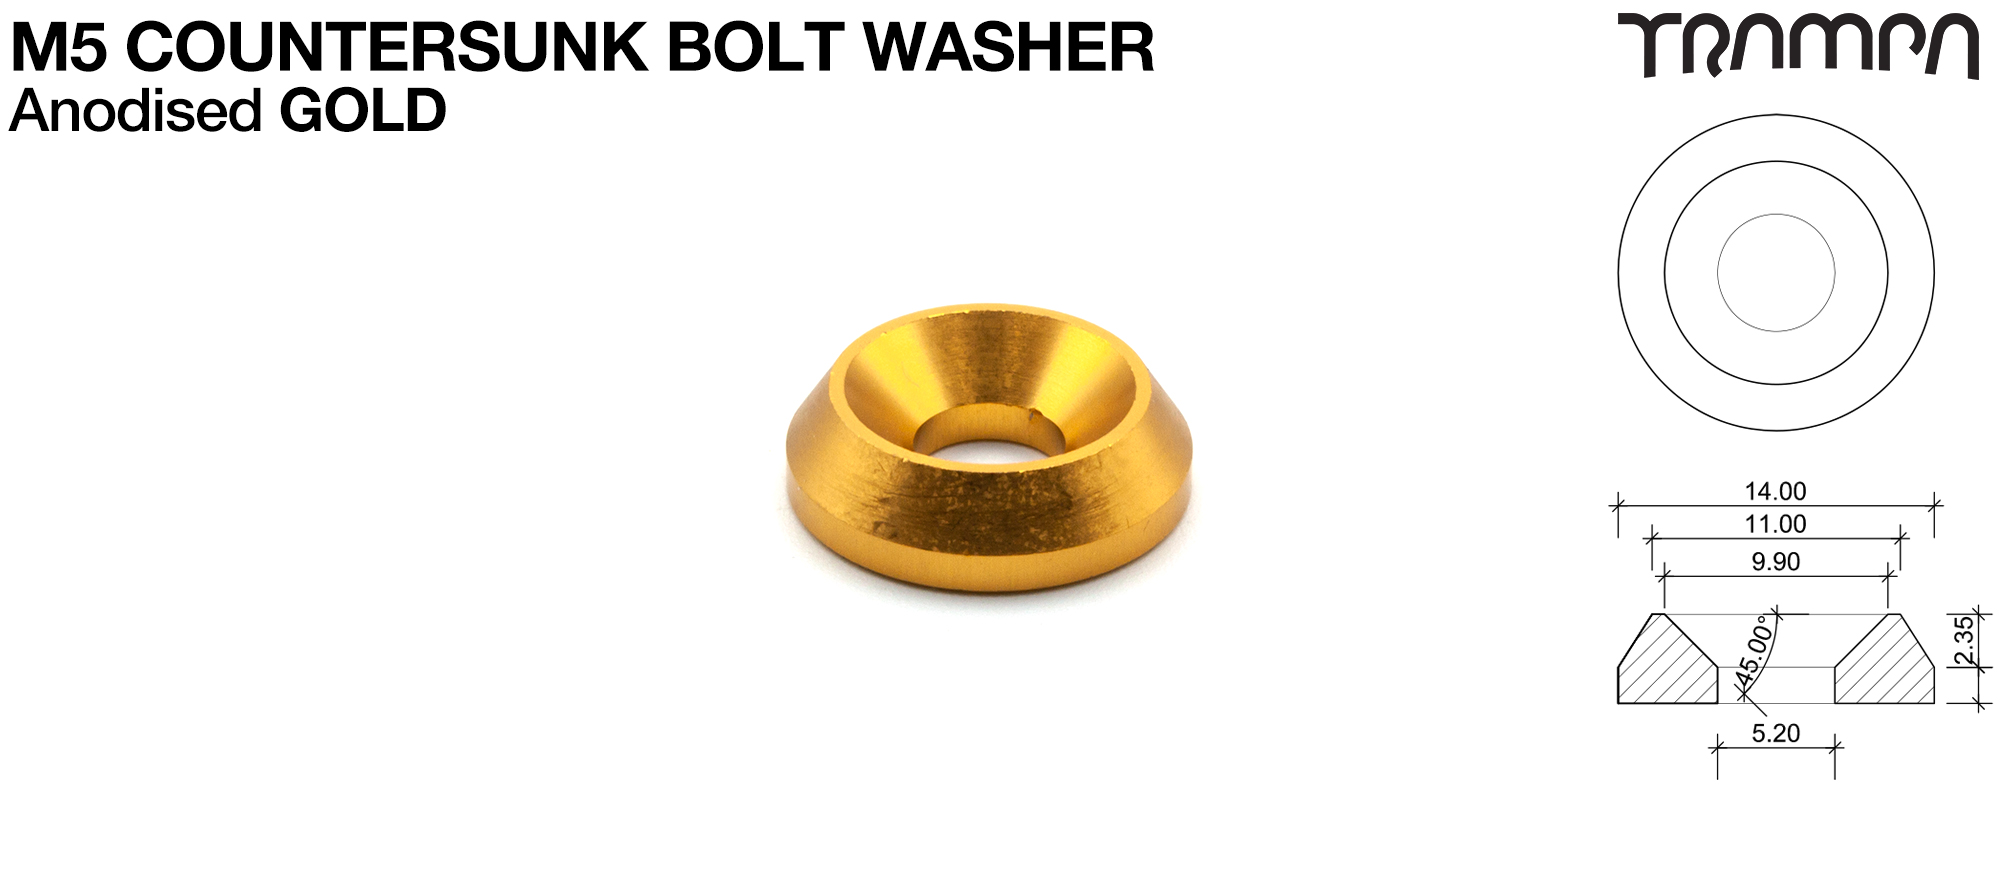 M5 COUNTERSUNK Washer Anodised - GOLD